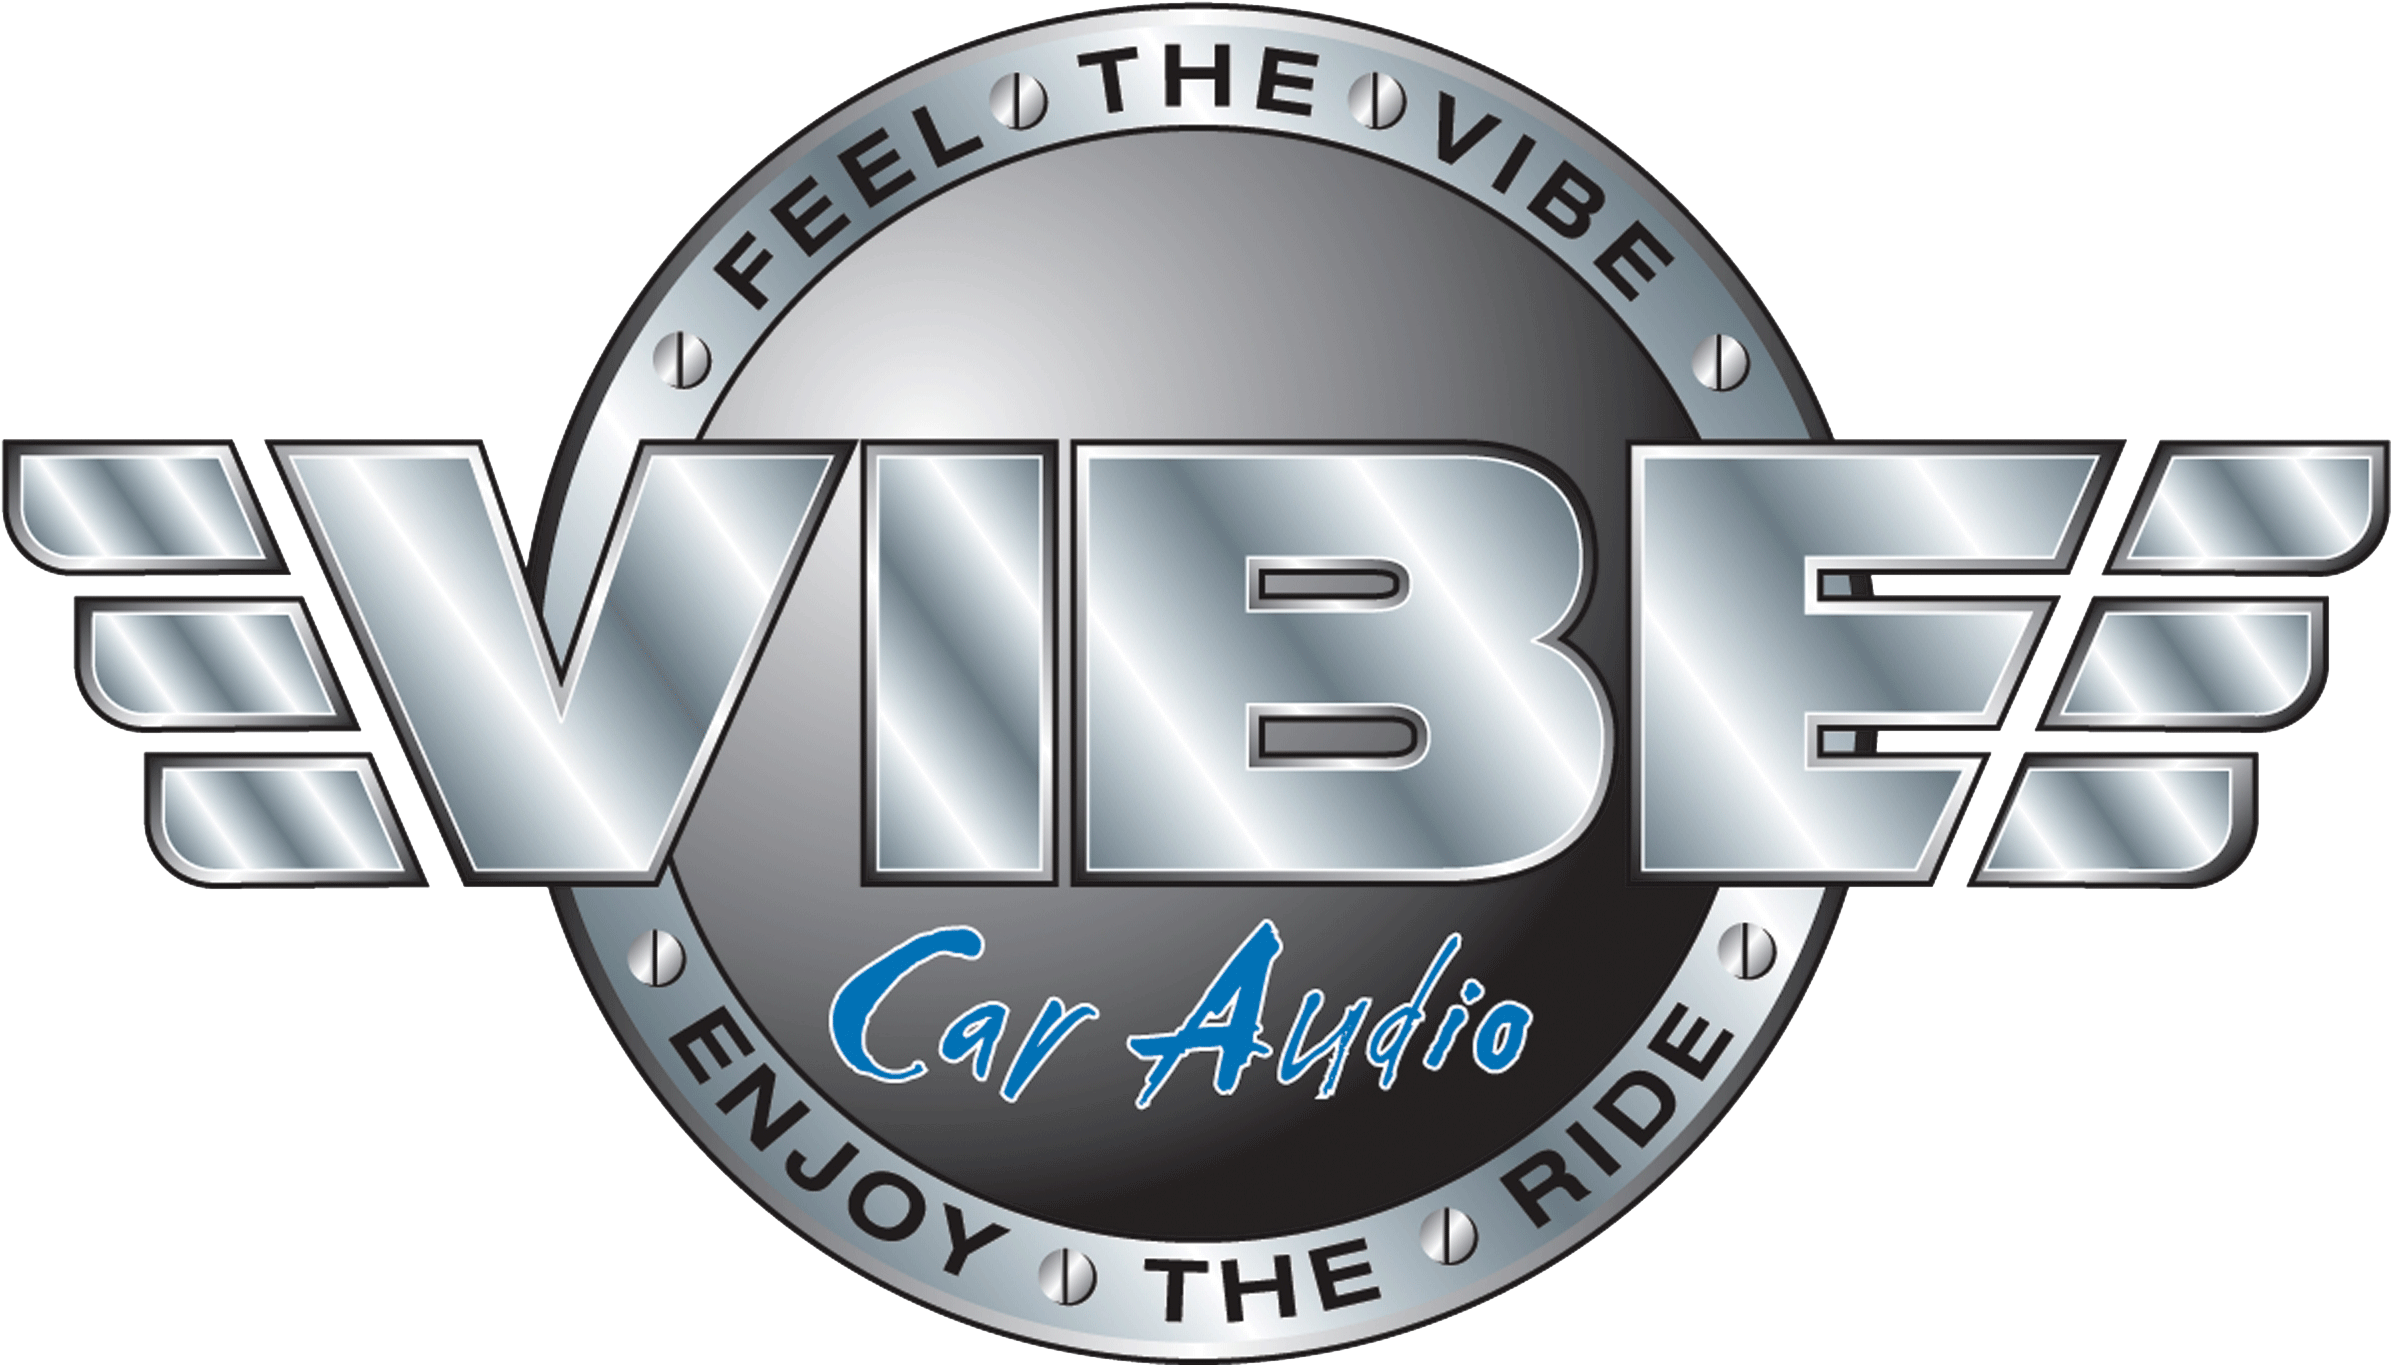 Vibe Car Audio Feel The Vibe Enjoy The Ride - Vibe Car Audio (2528x1490), Png Download